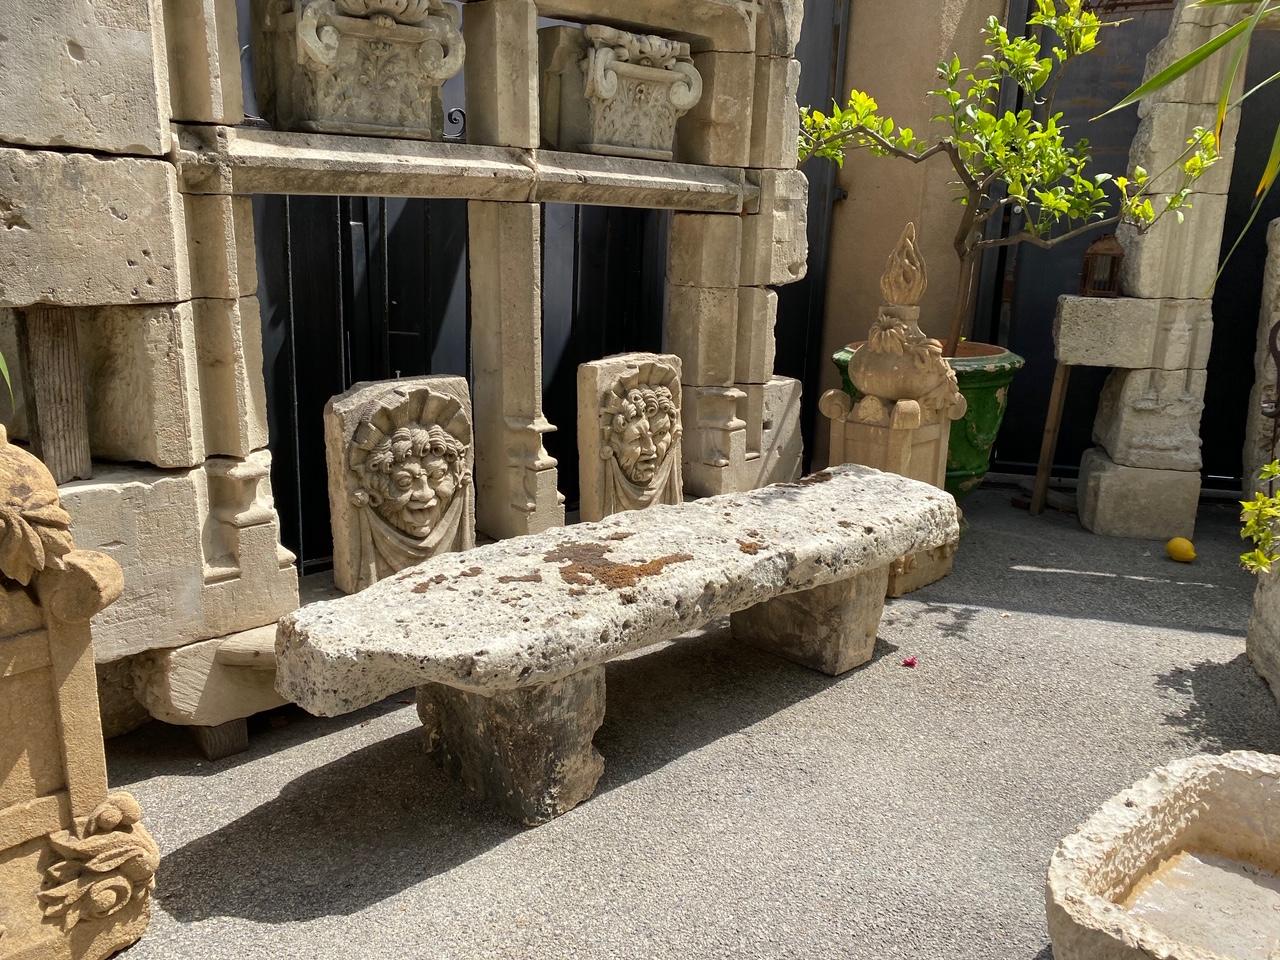 17th century hand carved garden stone bench. This rustic beauty is a rare piece indeed A beautiful garden bench simple lines that works in an interior as a seating or decorative architectural sculpted element. Mounted against a wall in a modern